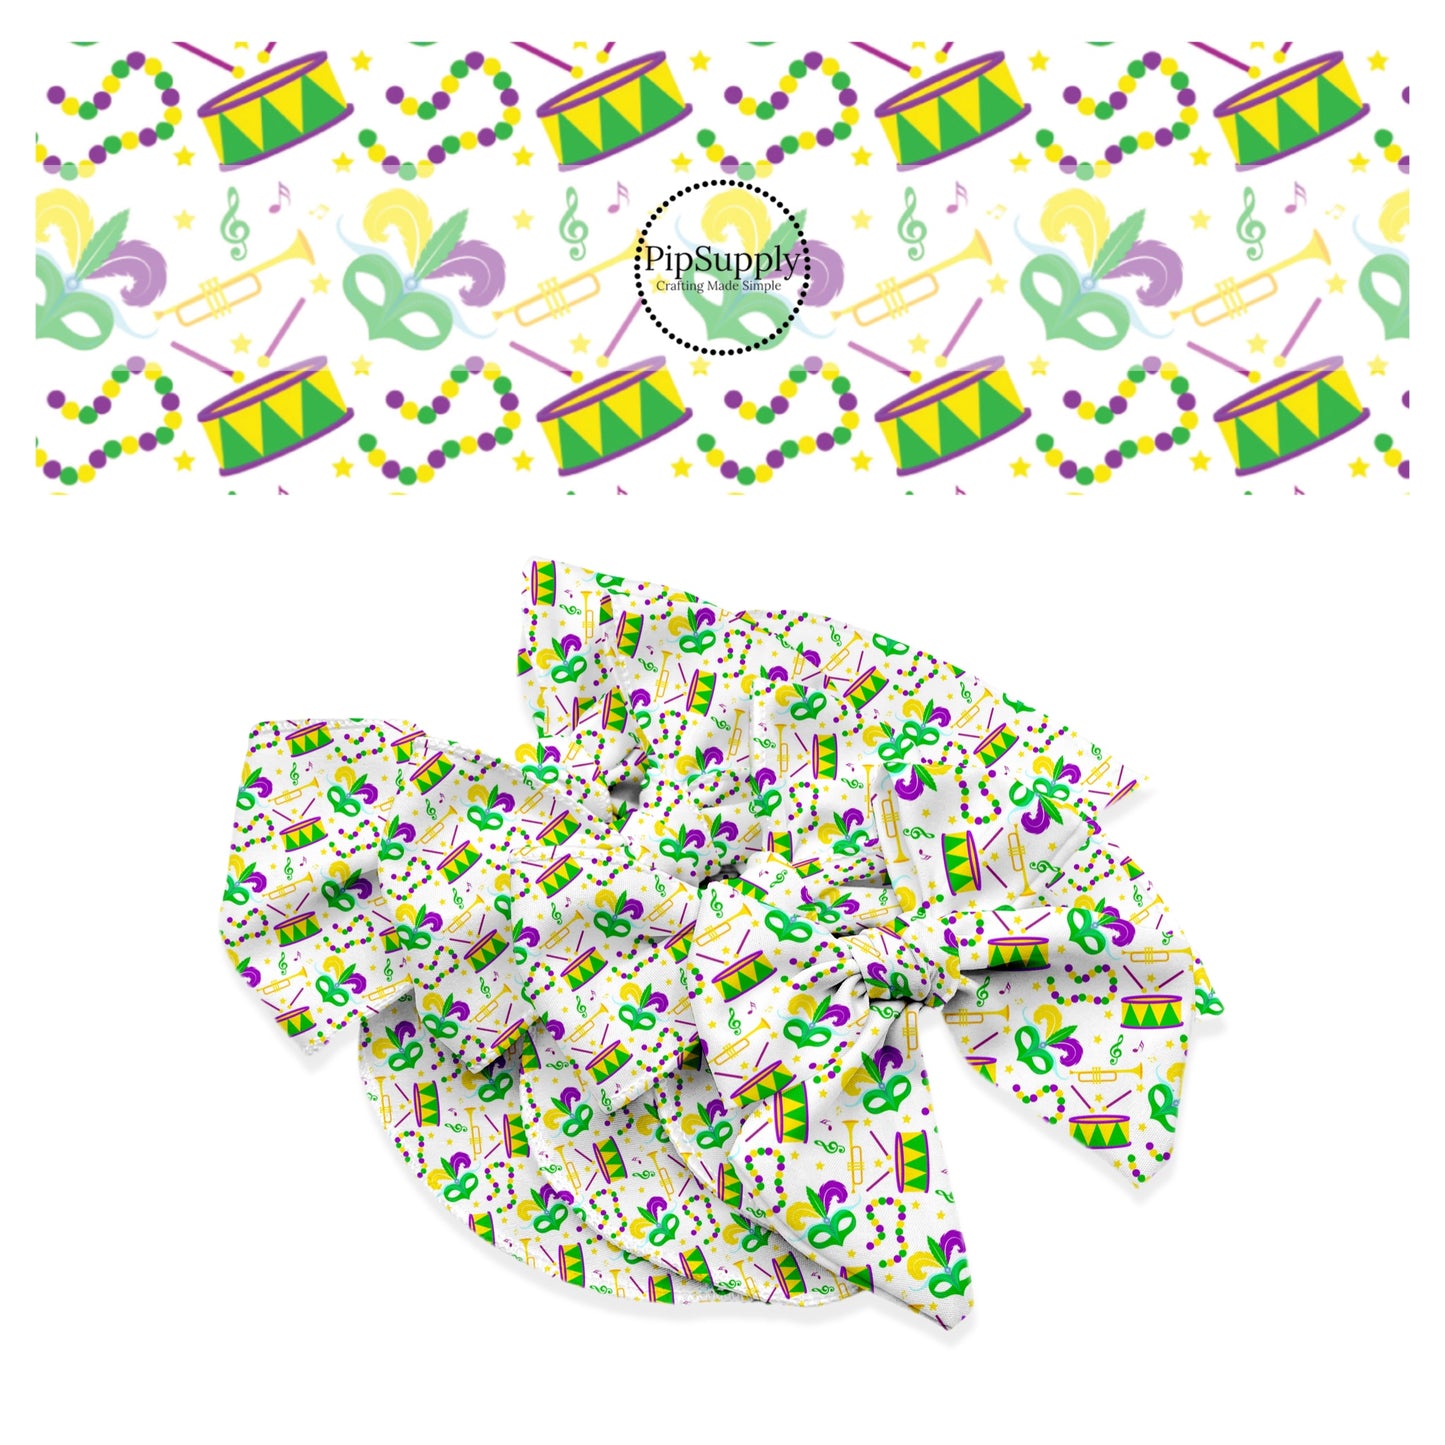 Green and yellow drums with purple sticks and green mask with green, yellow, and purple feathers. With green, yellow, and purple bead necklace and green and purple music notes and trumpet bow strips